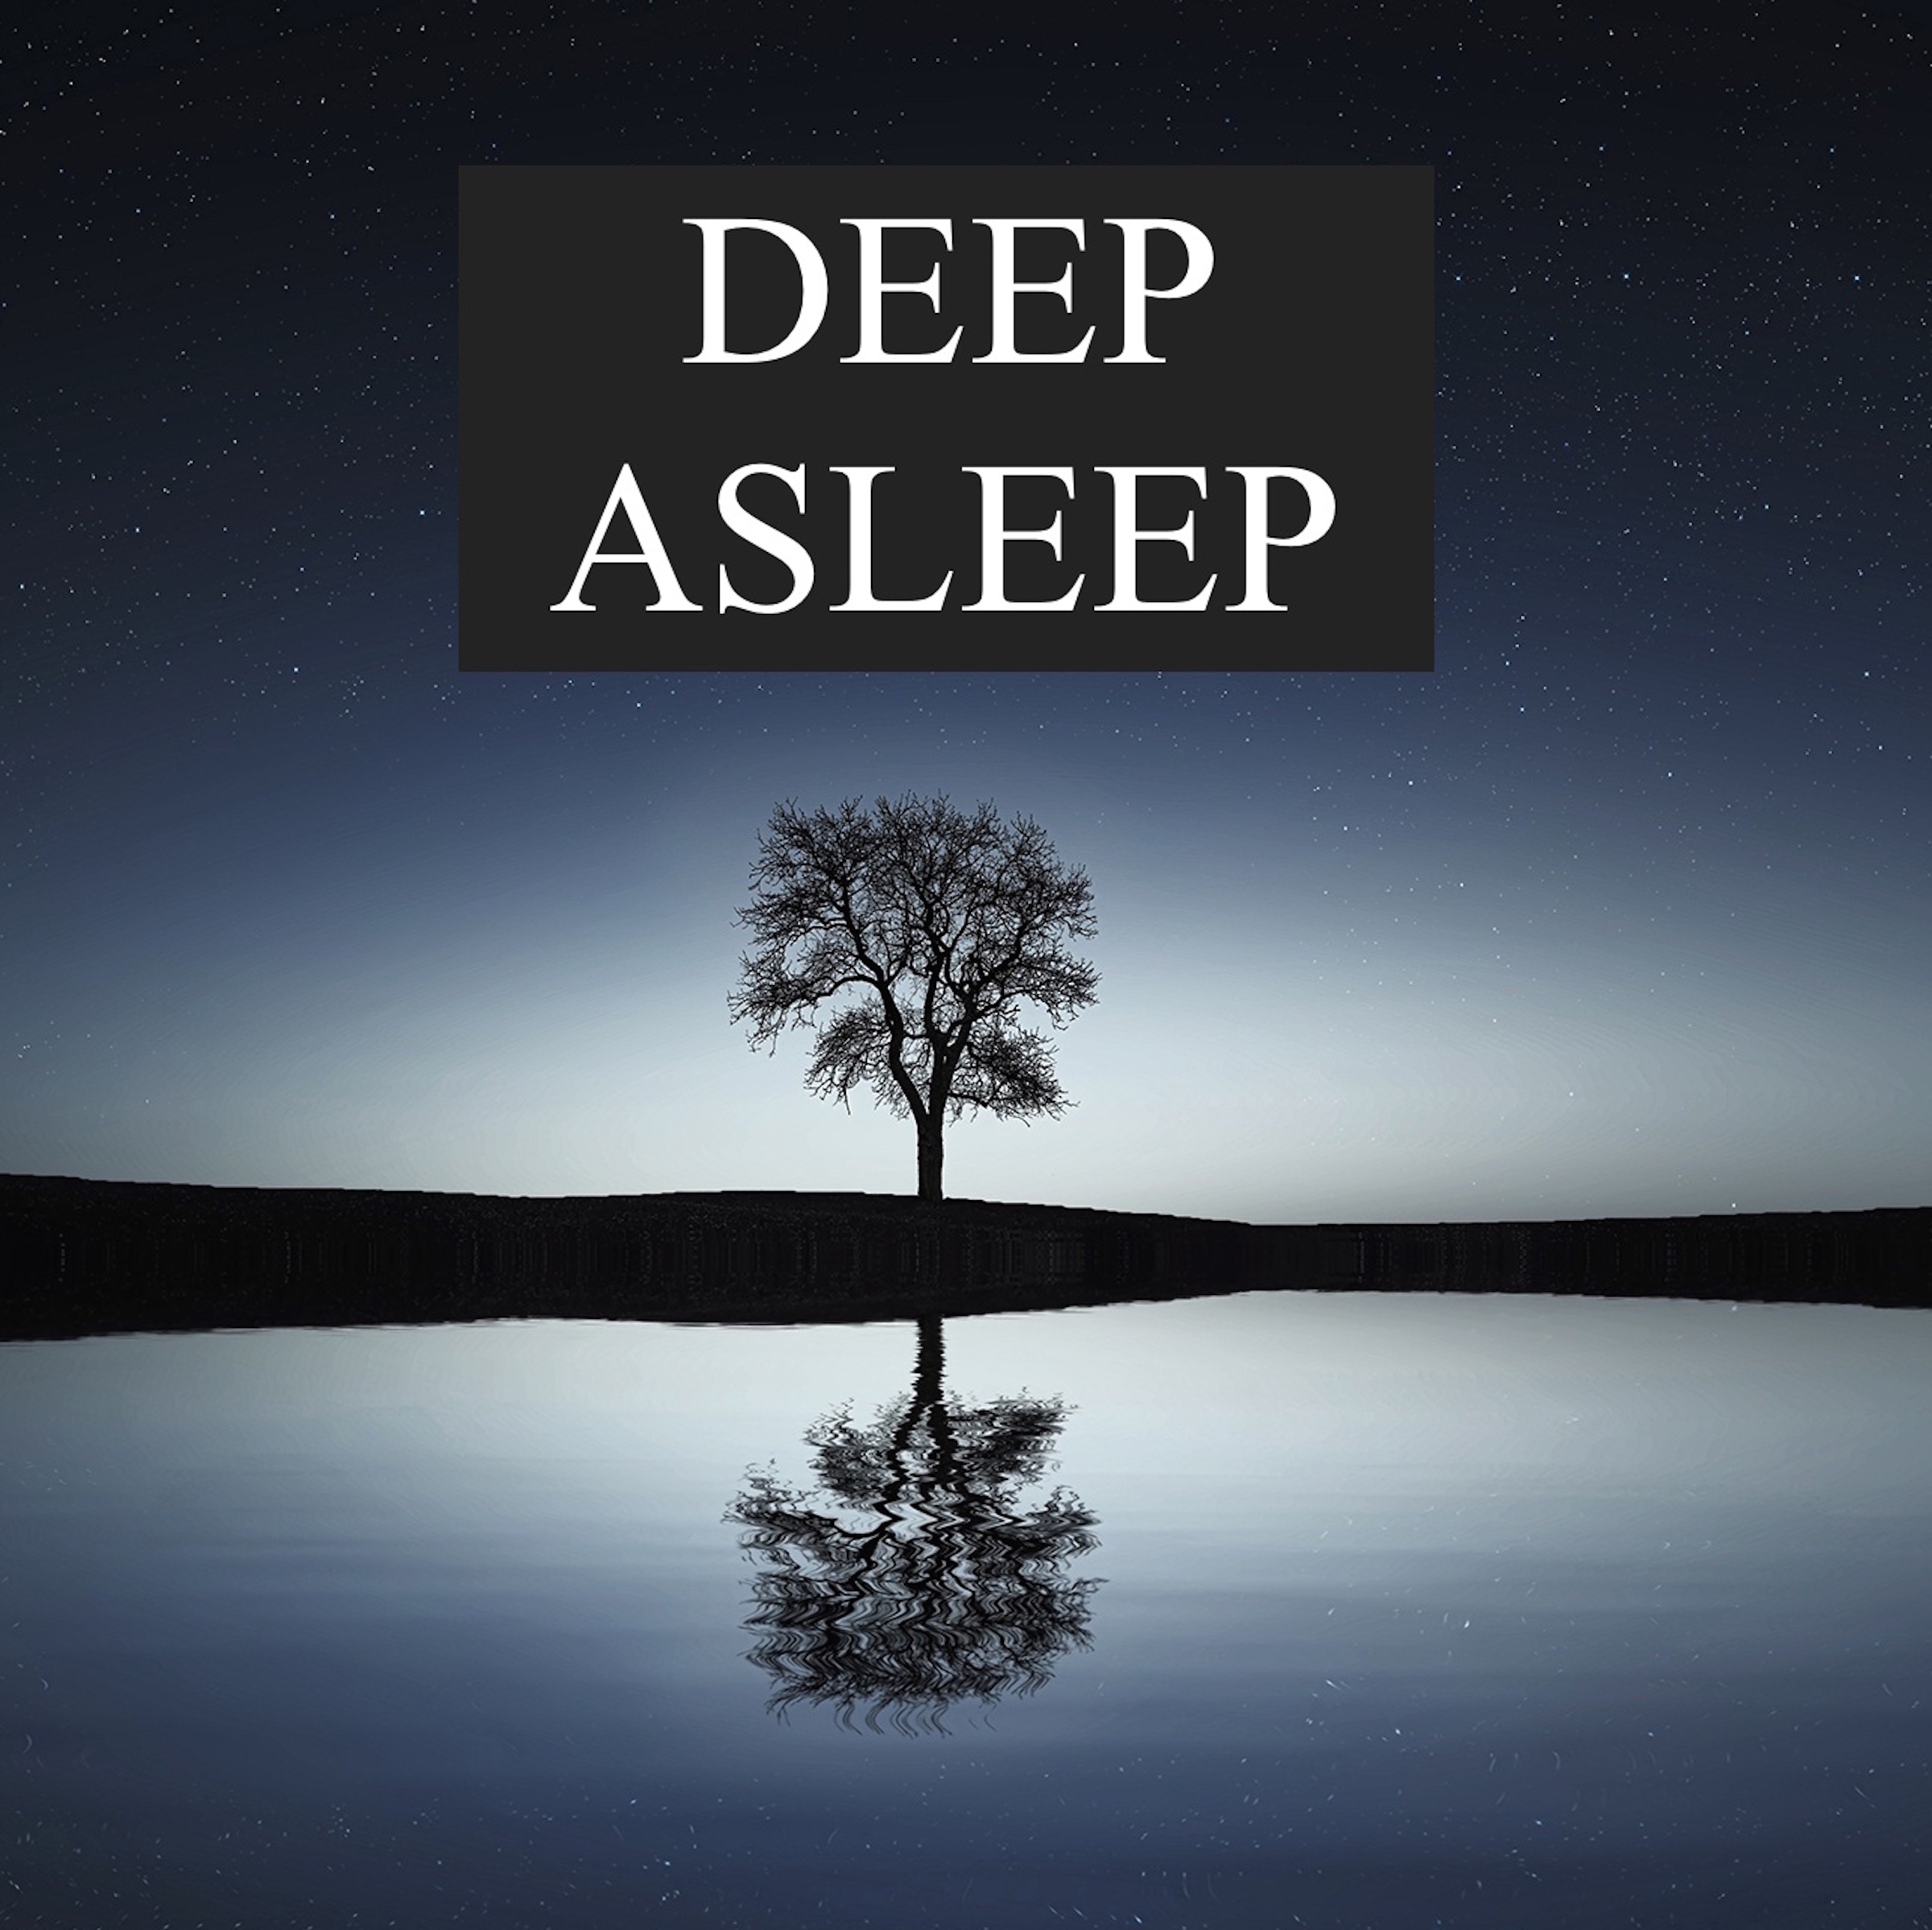 Deep Asleep - Ultimate Deep Sleep Mix to Fall and Stay Asleep All Night Long, and to Help with Meditation, Yoga, Stress & Anxiety Relief and Better Sleeping Habits